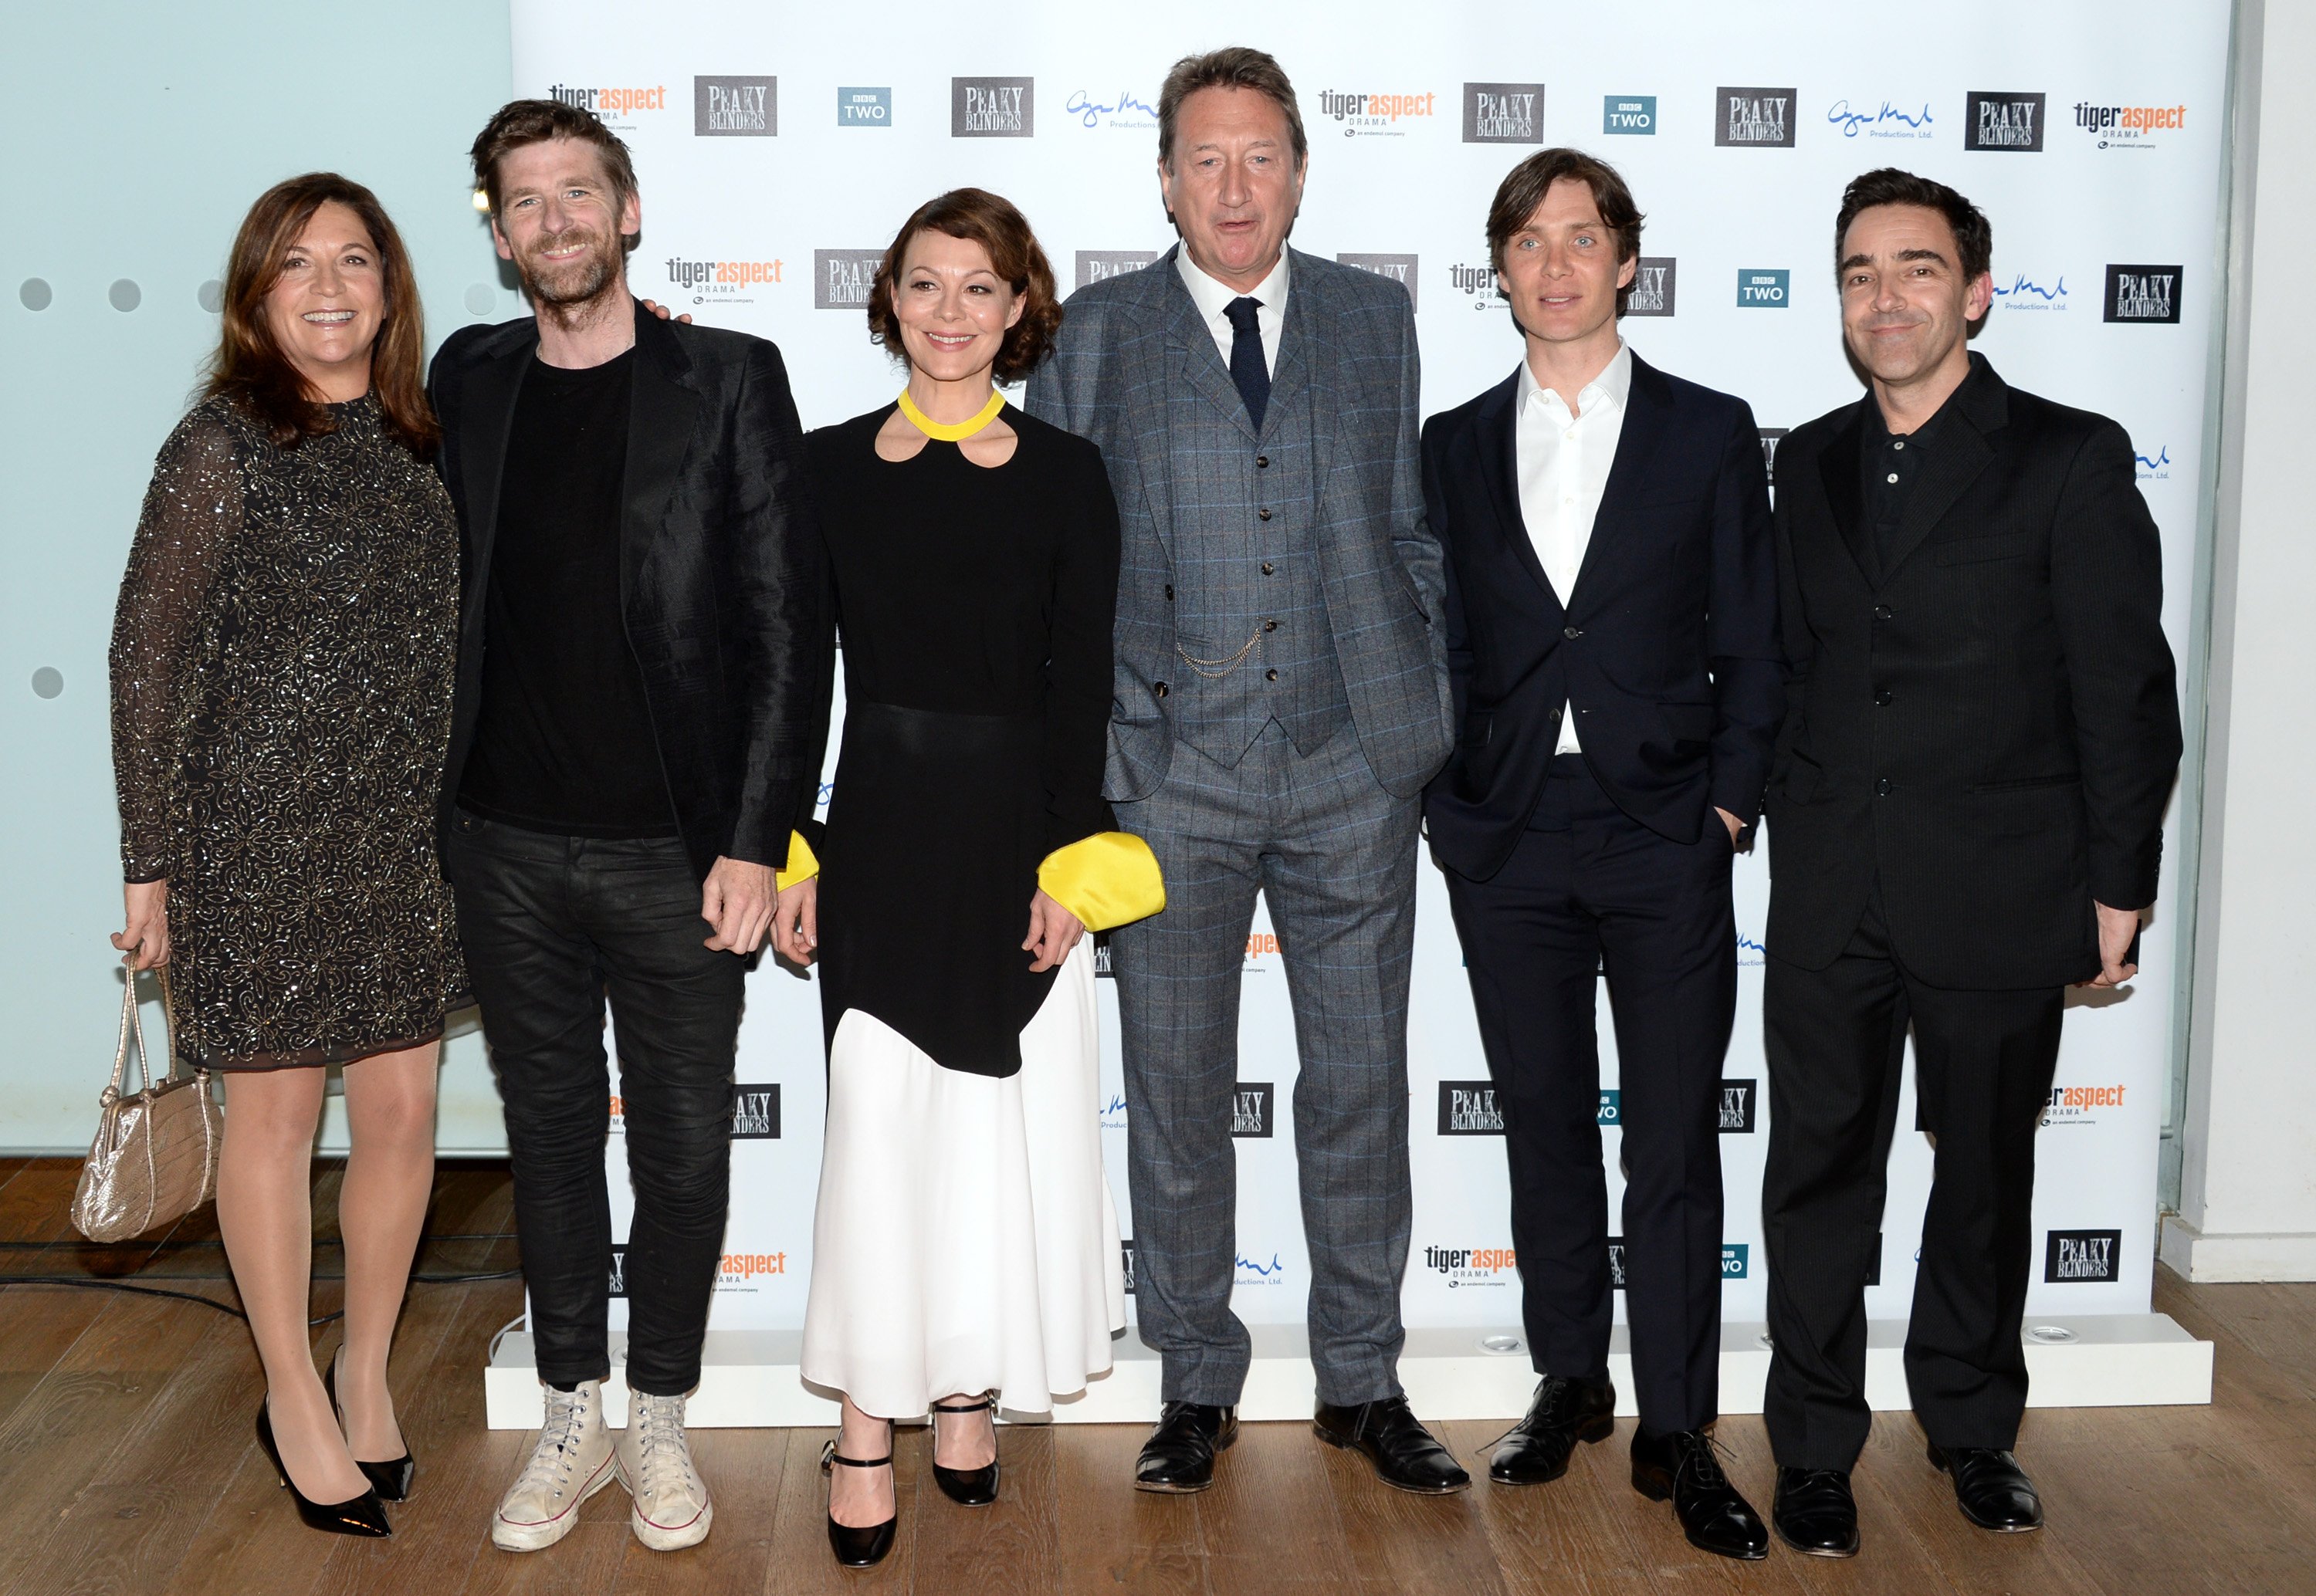 Peaky Blinders has an interesting meaning behind its name.Caryn Mandabach, Paul Anderson, Helen McCrory, Steven Knight and Cillian Murphy smile for a photo.